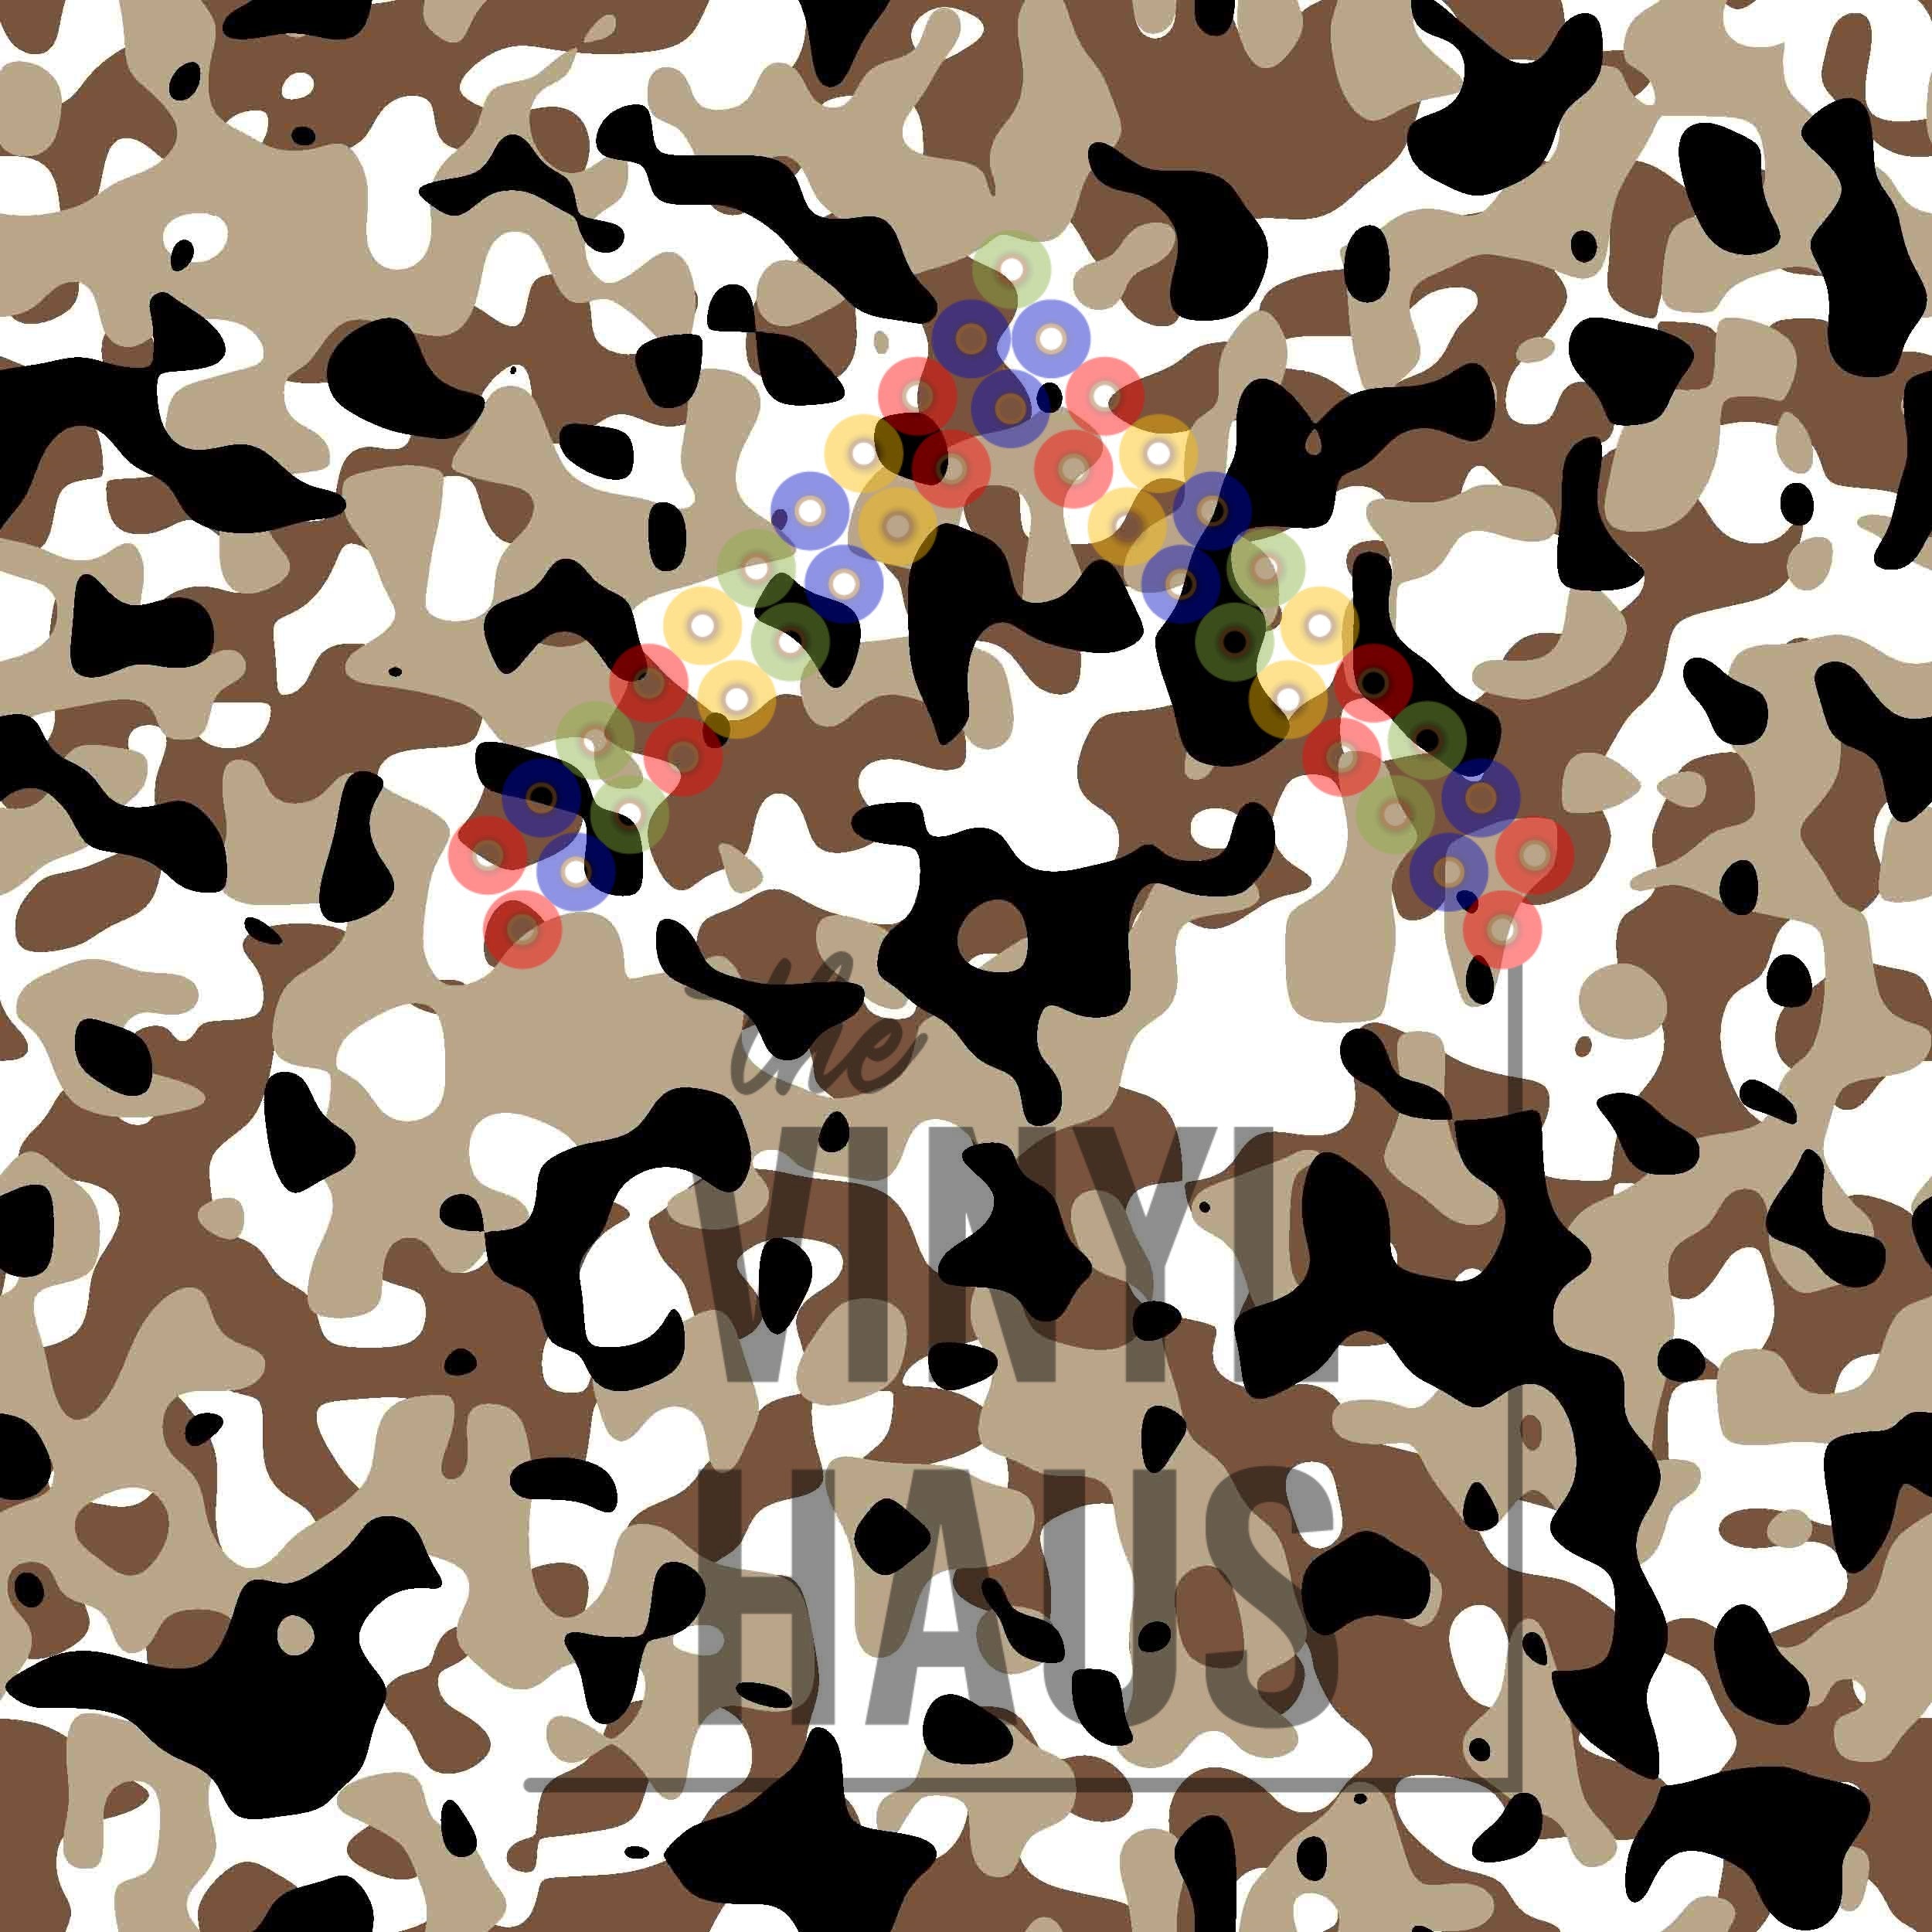 Earthen Camo Chaos Pattern - Pattern Vinyl and HTV – Crafter's